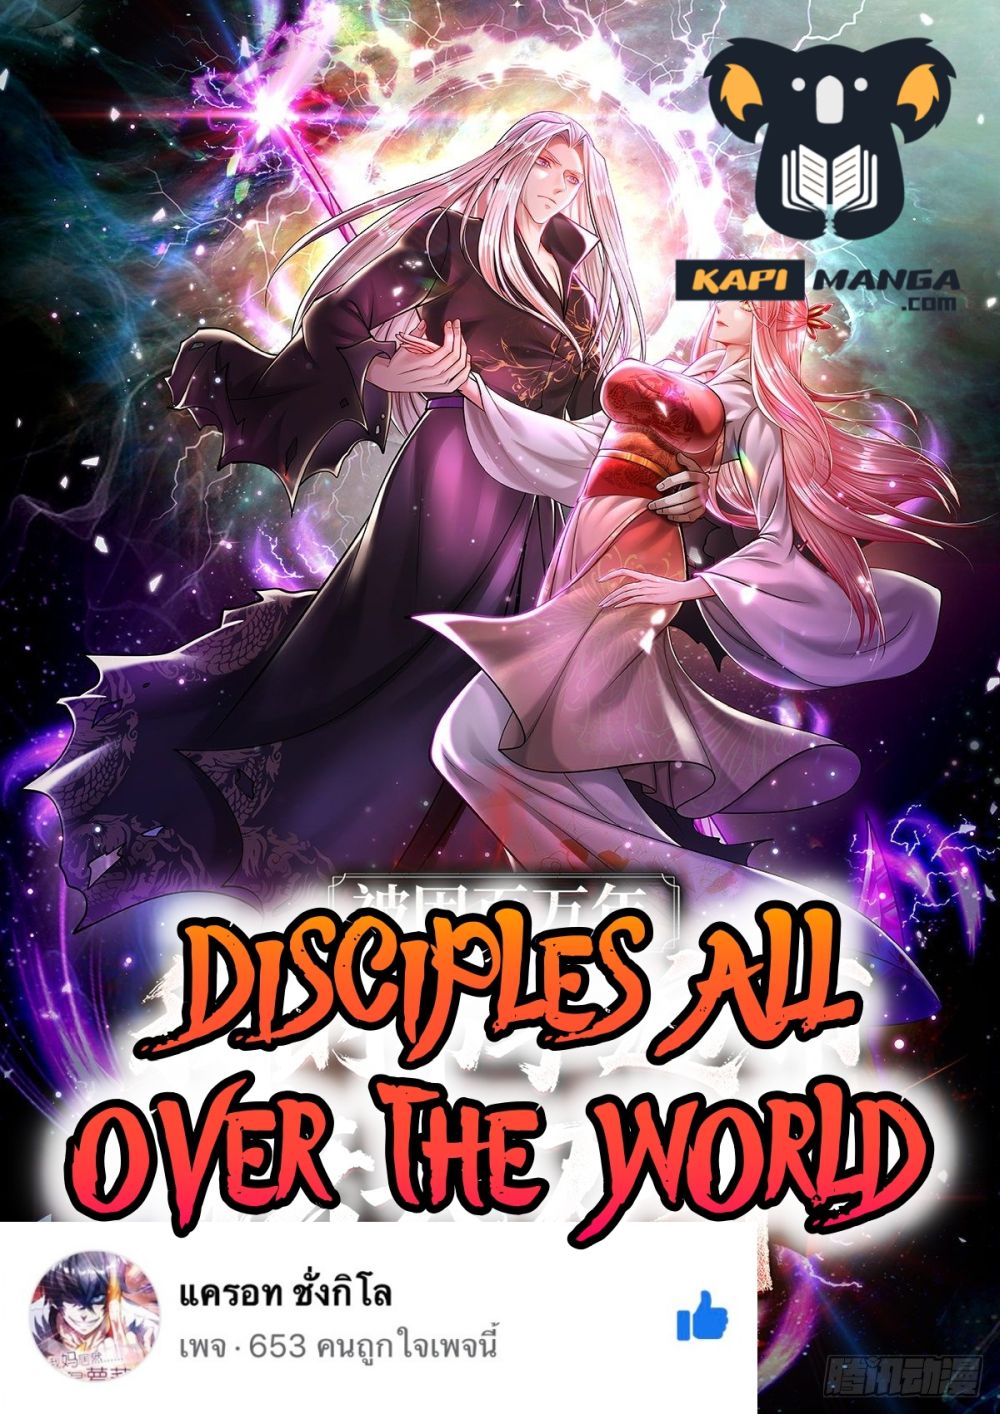 Disciples All Over the World à¸à¸­à¸à¸à¸µà¹ 21 (1)